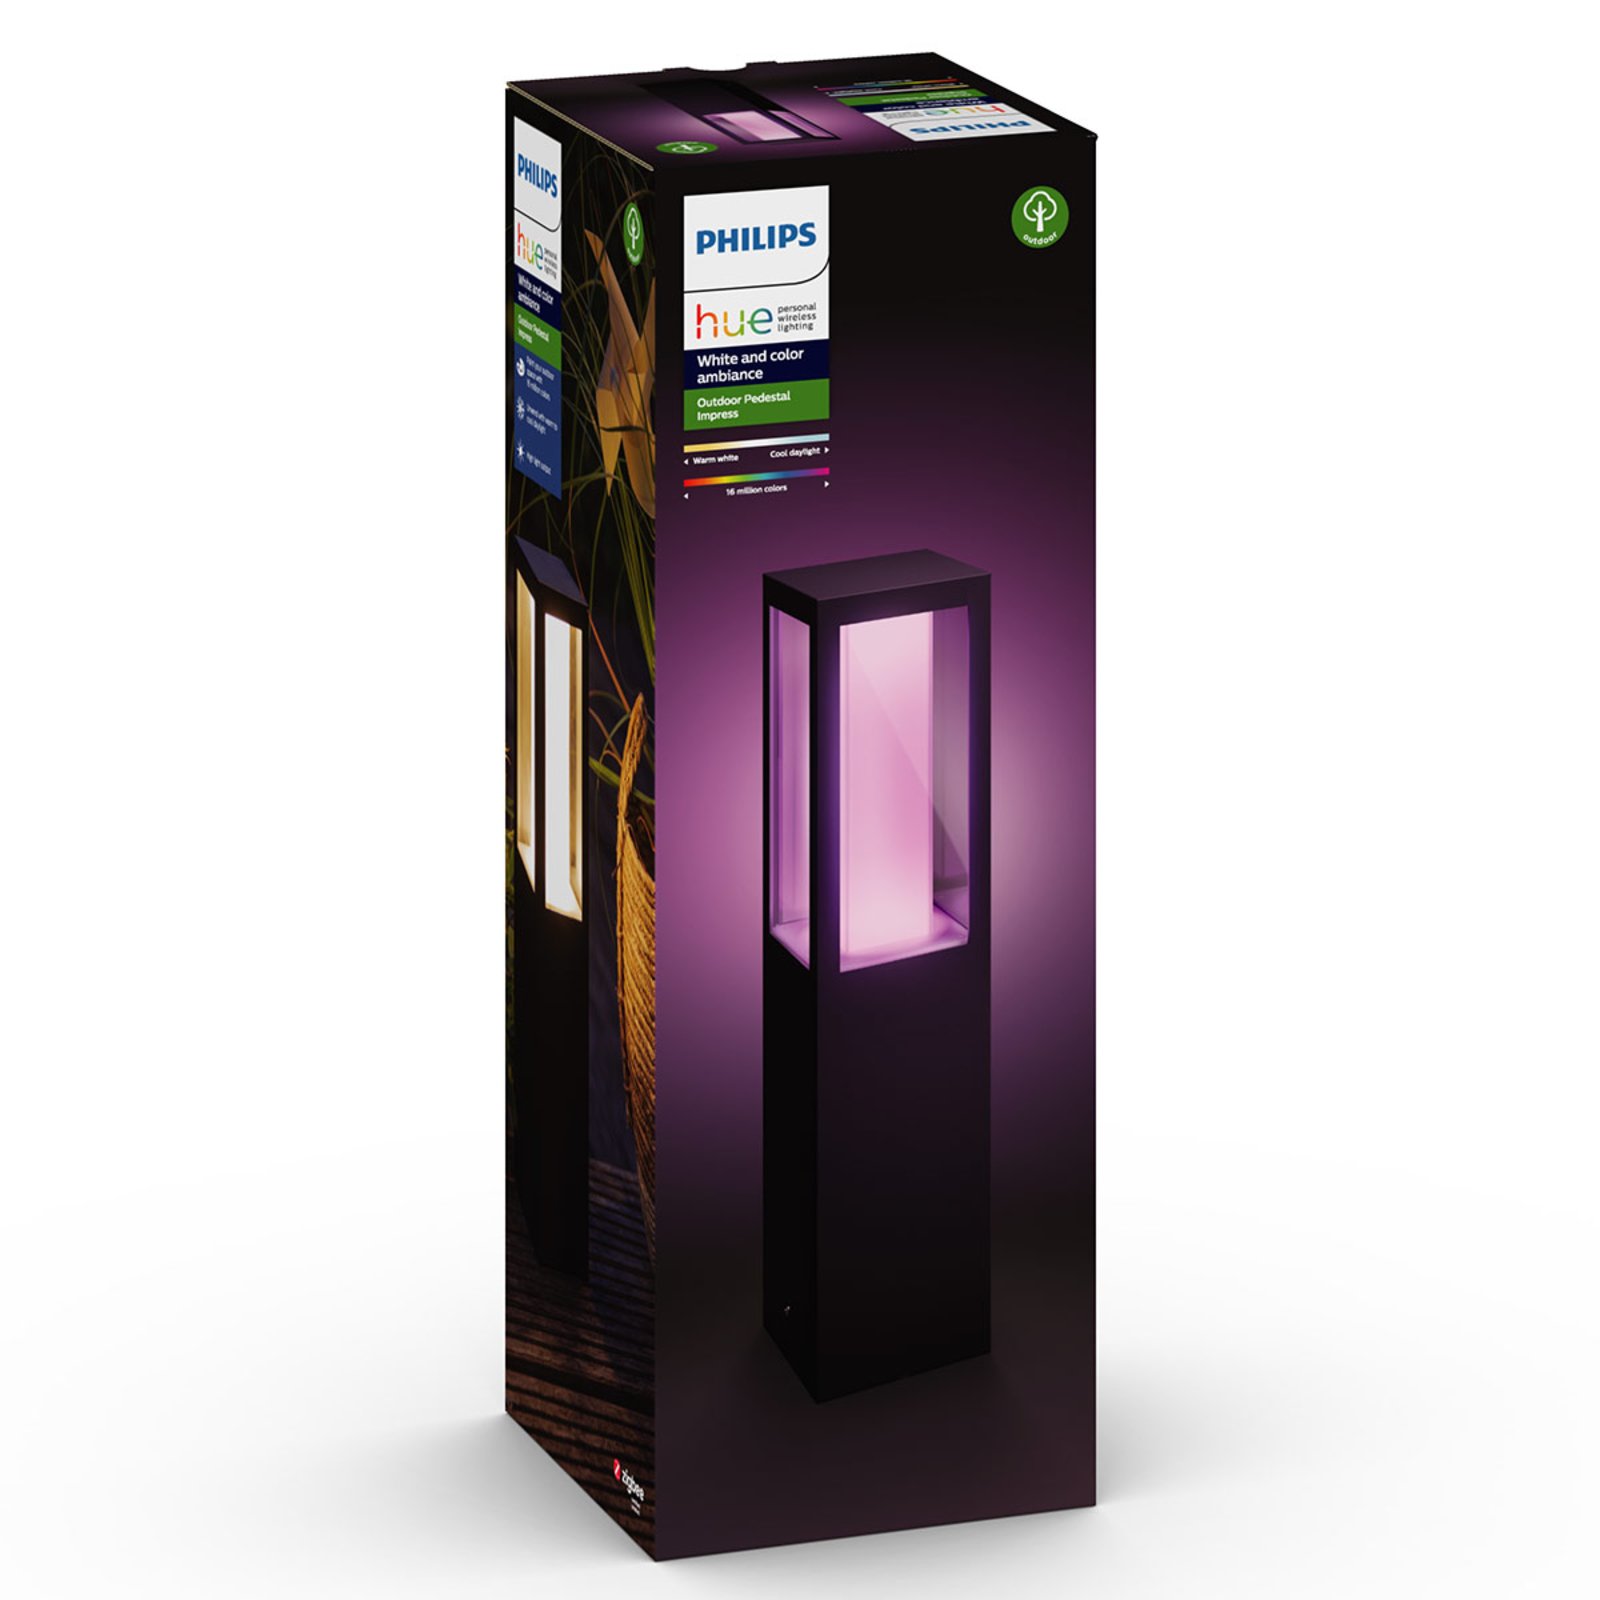 Philips Hue White+Color Impress lampioncino a LED